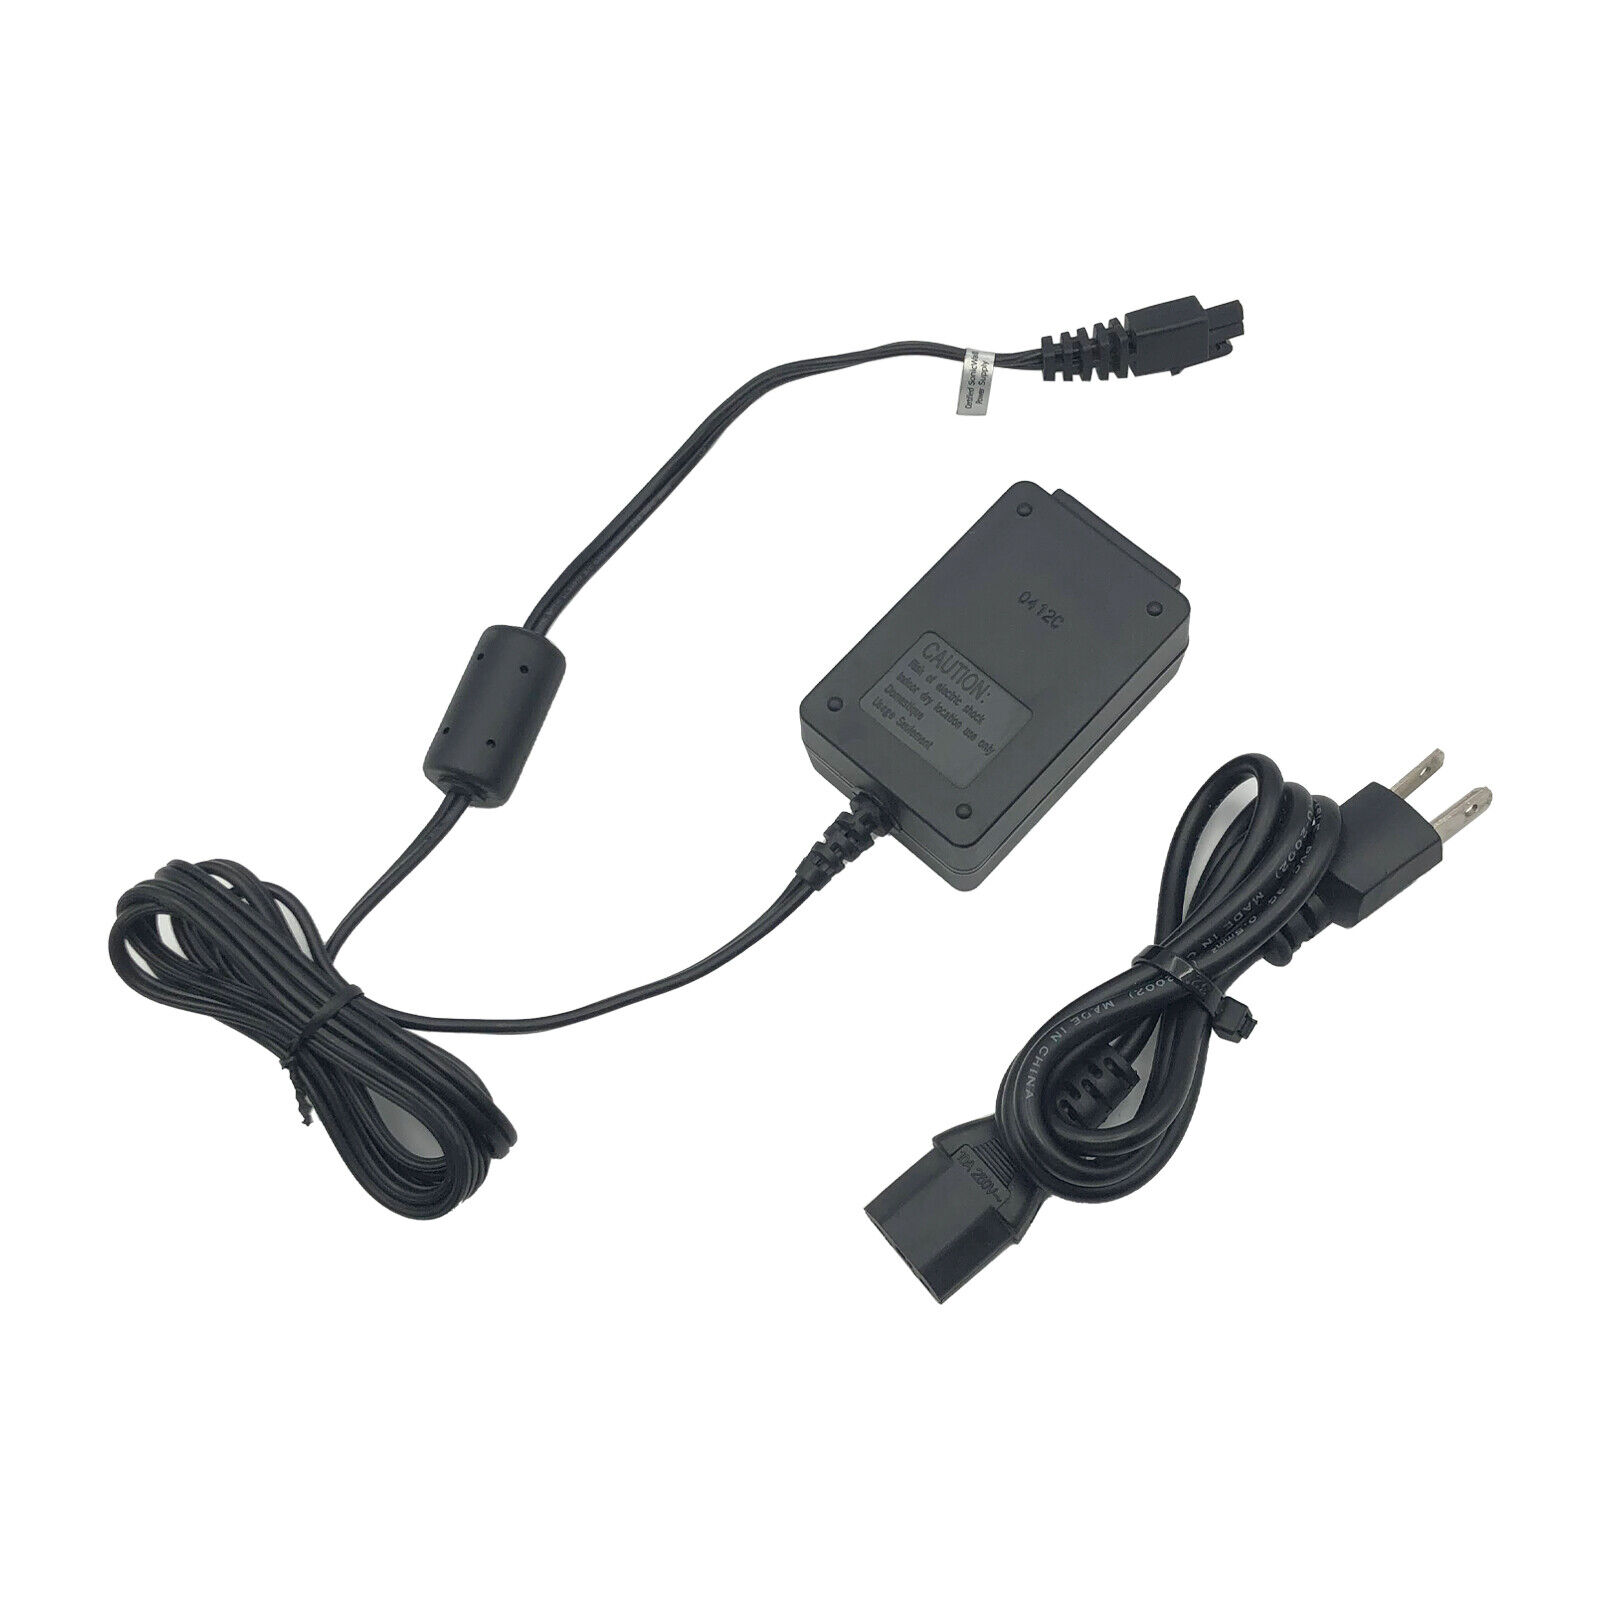 Quality PA-150B AC Adapter Power Supply Cord Cable Charger 12V 1.5A Brand: Unbranded Type: AC/AC Adapter Output Volt